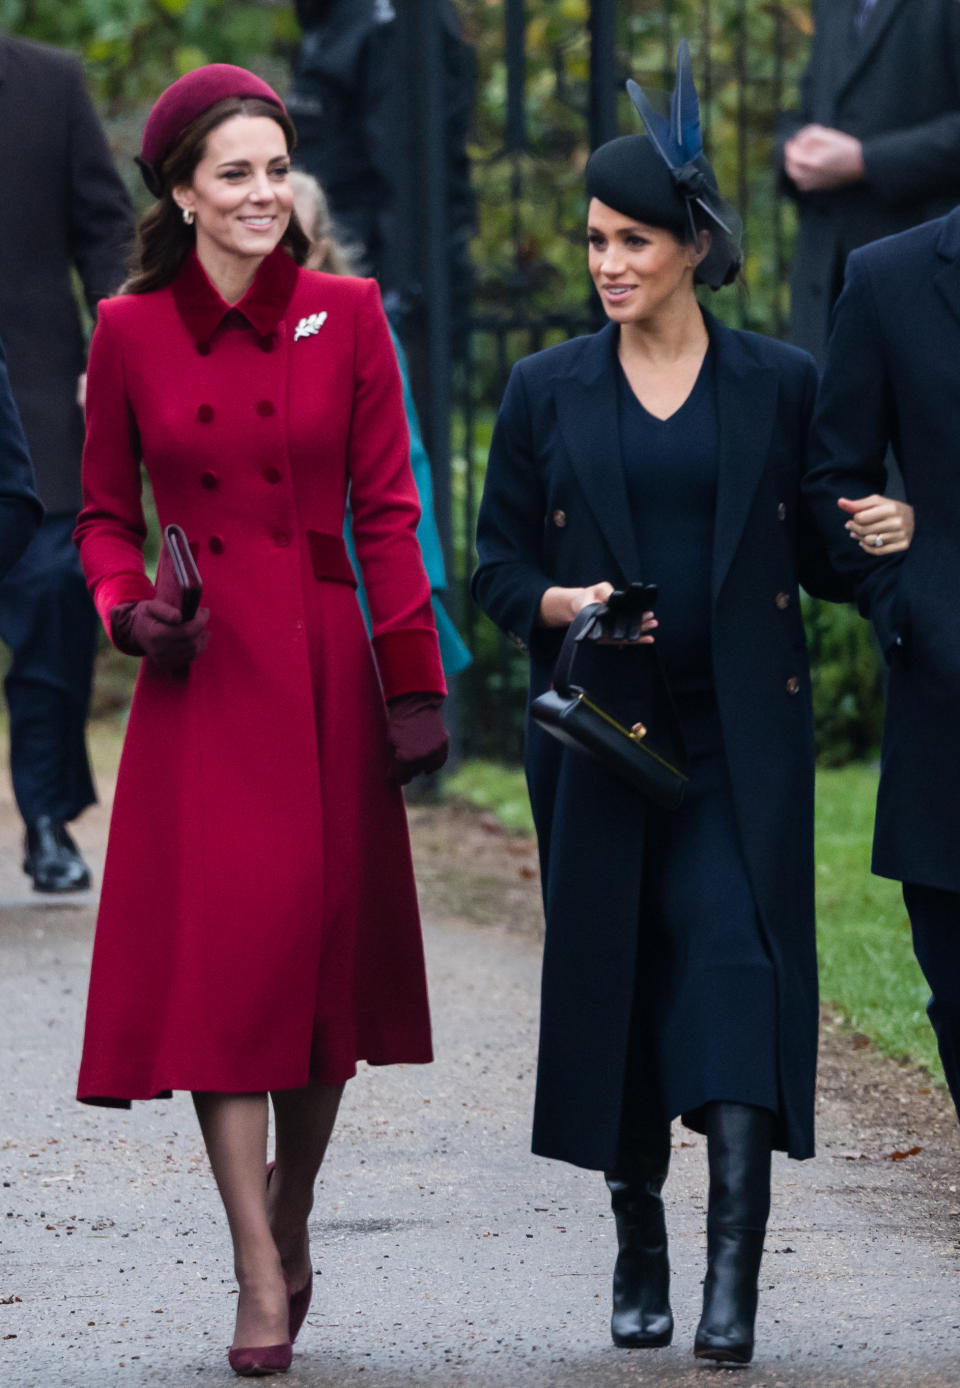 Despite their united front on Christmas Day, rumours of a feud between Kate Middleton and Meghan Markle are still circulating. Source: Getty